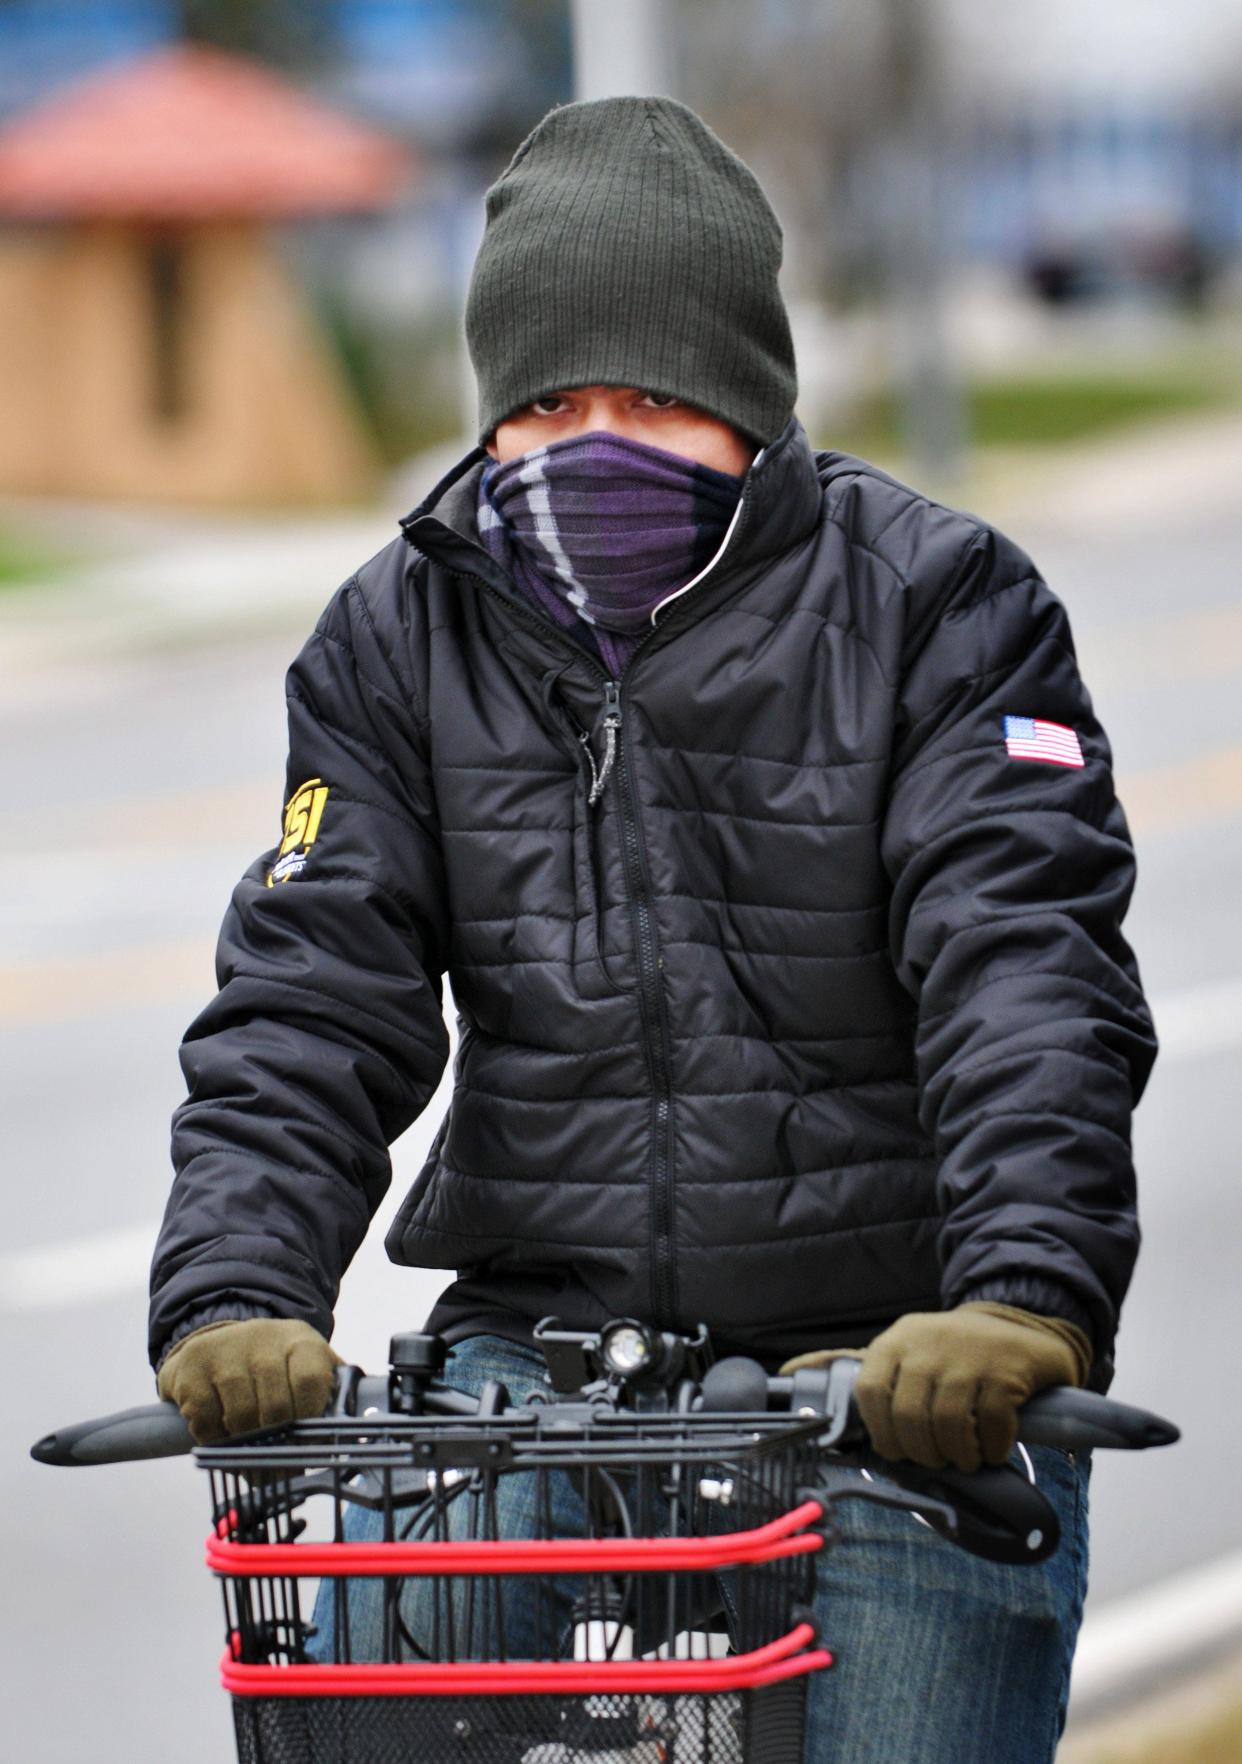 Jacksonville bicyclist Omar Saif bundled up to ride through temperatures in the 30s in this January 2015 photo.